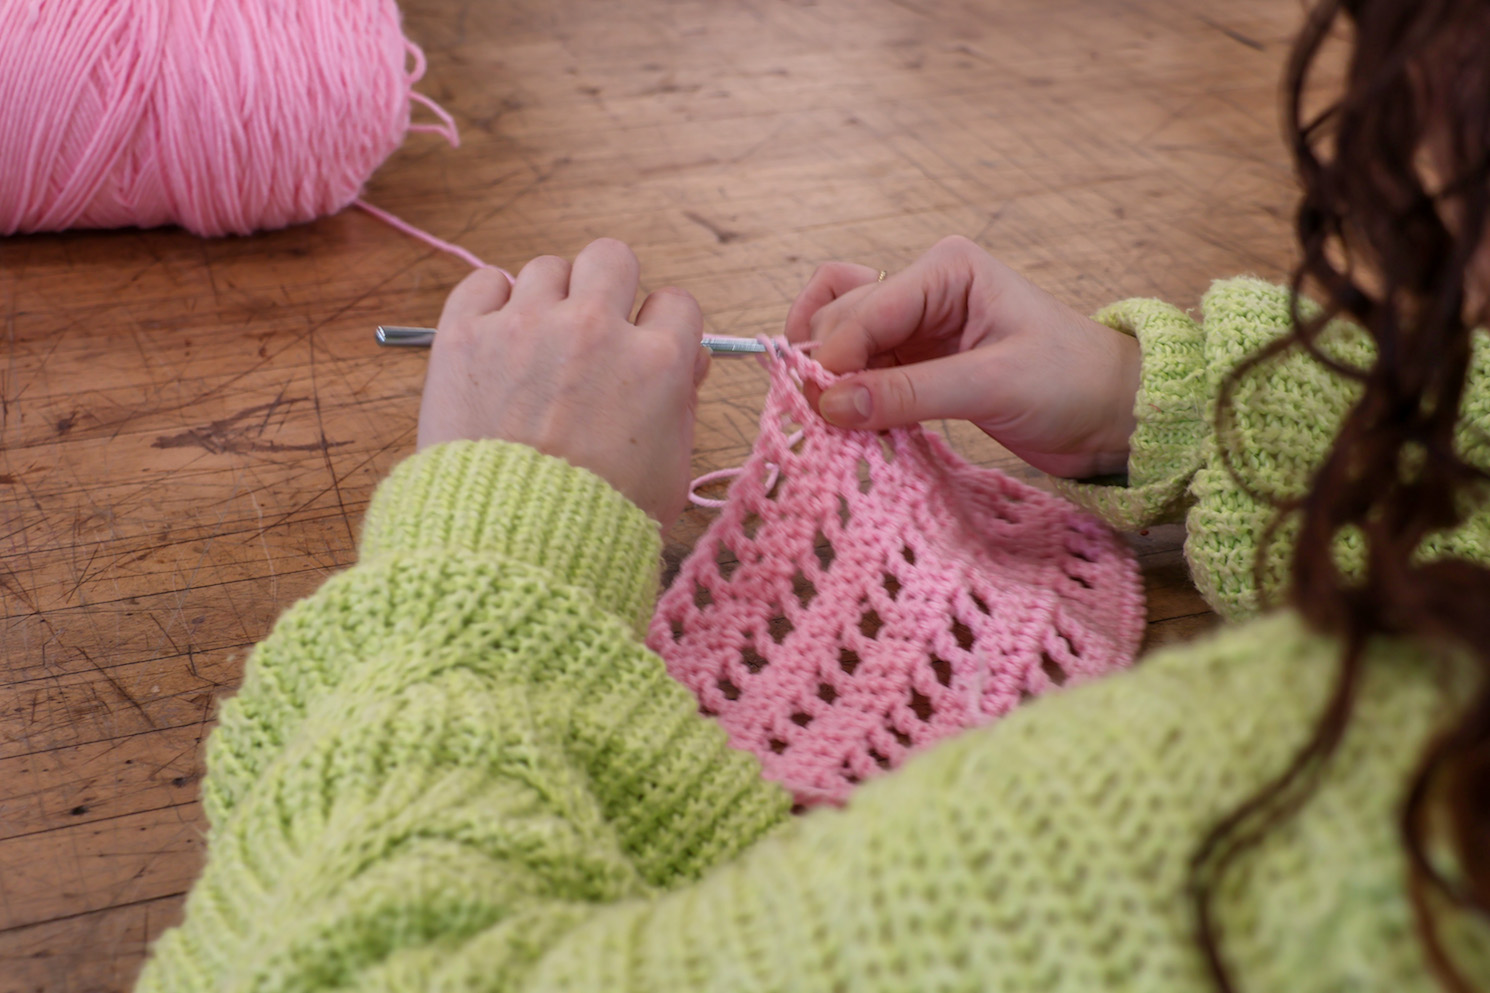 Becca Panes wears a neon green knitted sweater. Becca holds a metallic crochet hook and pink yarns.